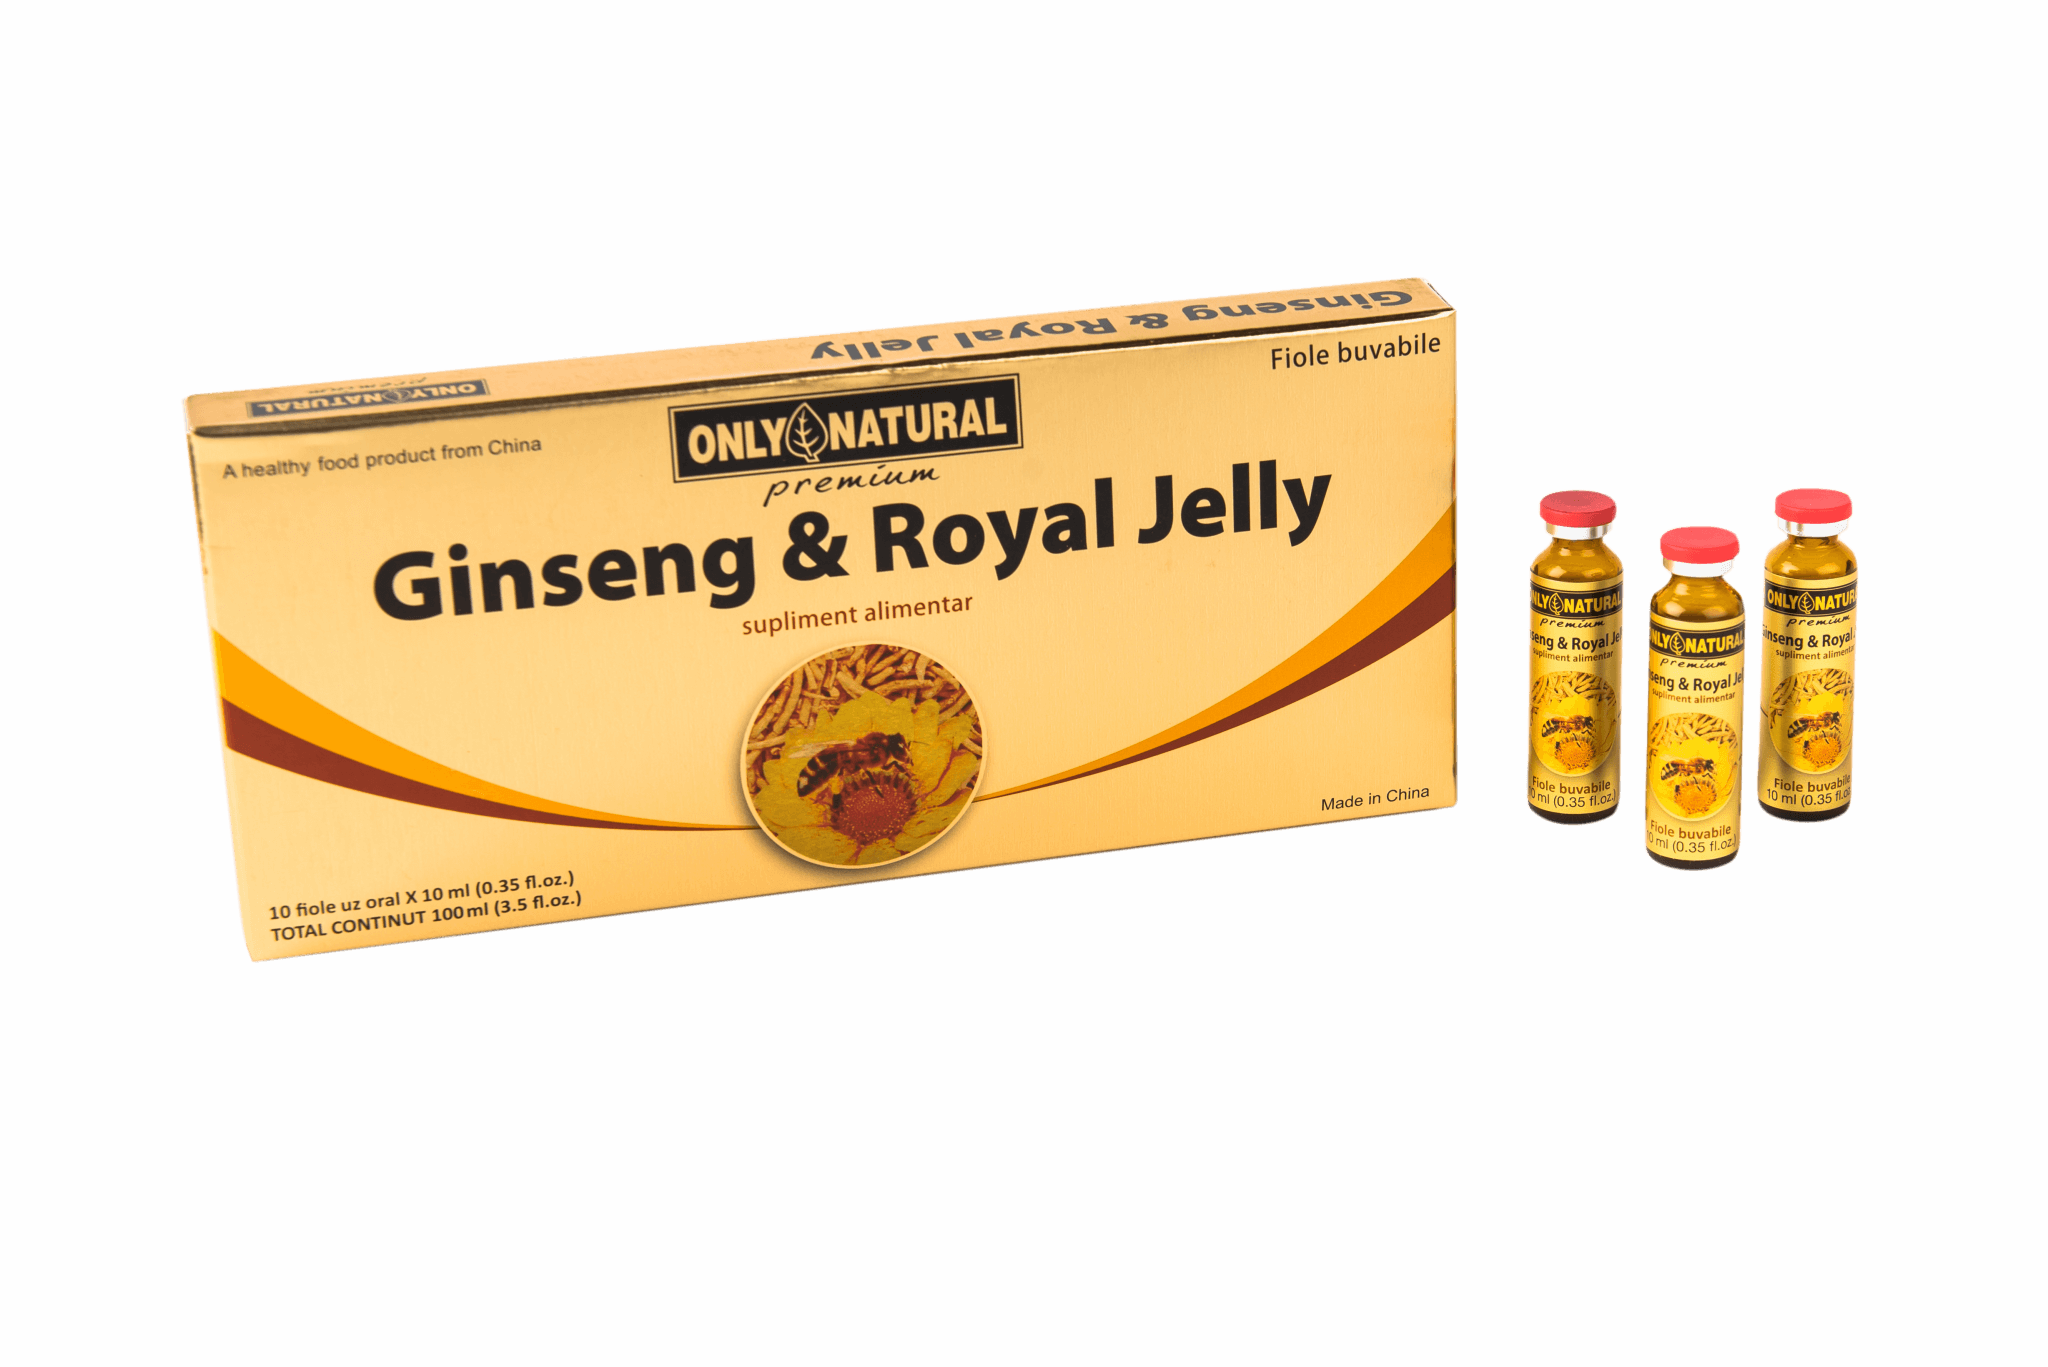 ONLY NATURAL GINSENG + ROYAL JELLY 10 FIOLE X 10ML helpnet imagine noua